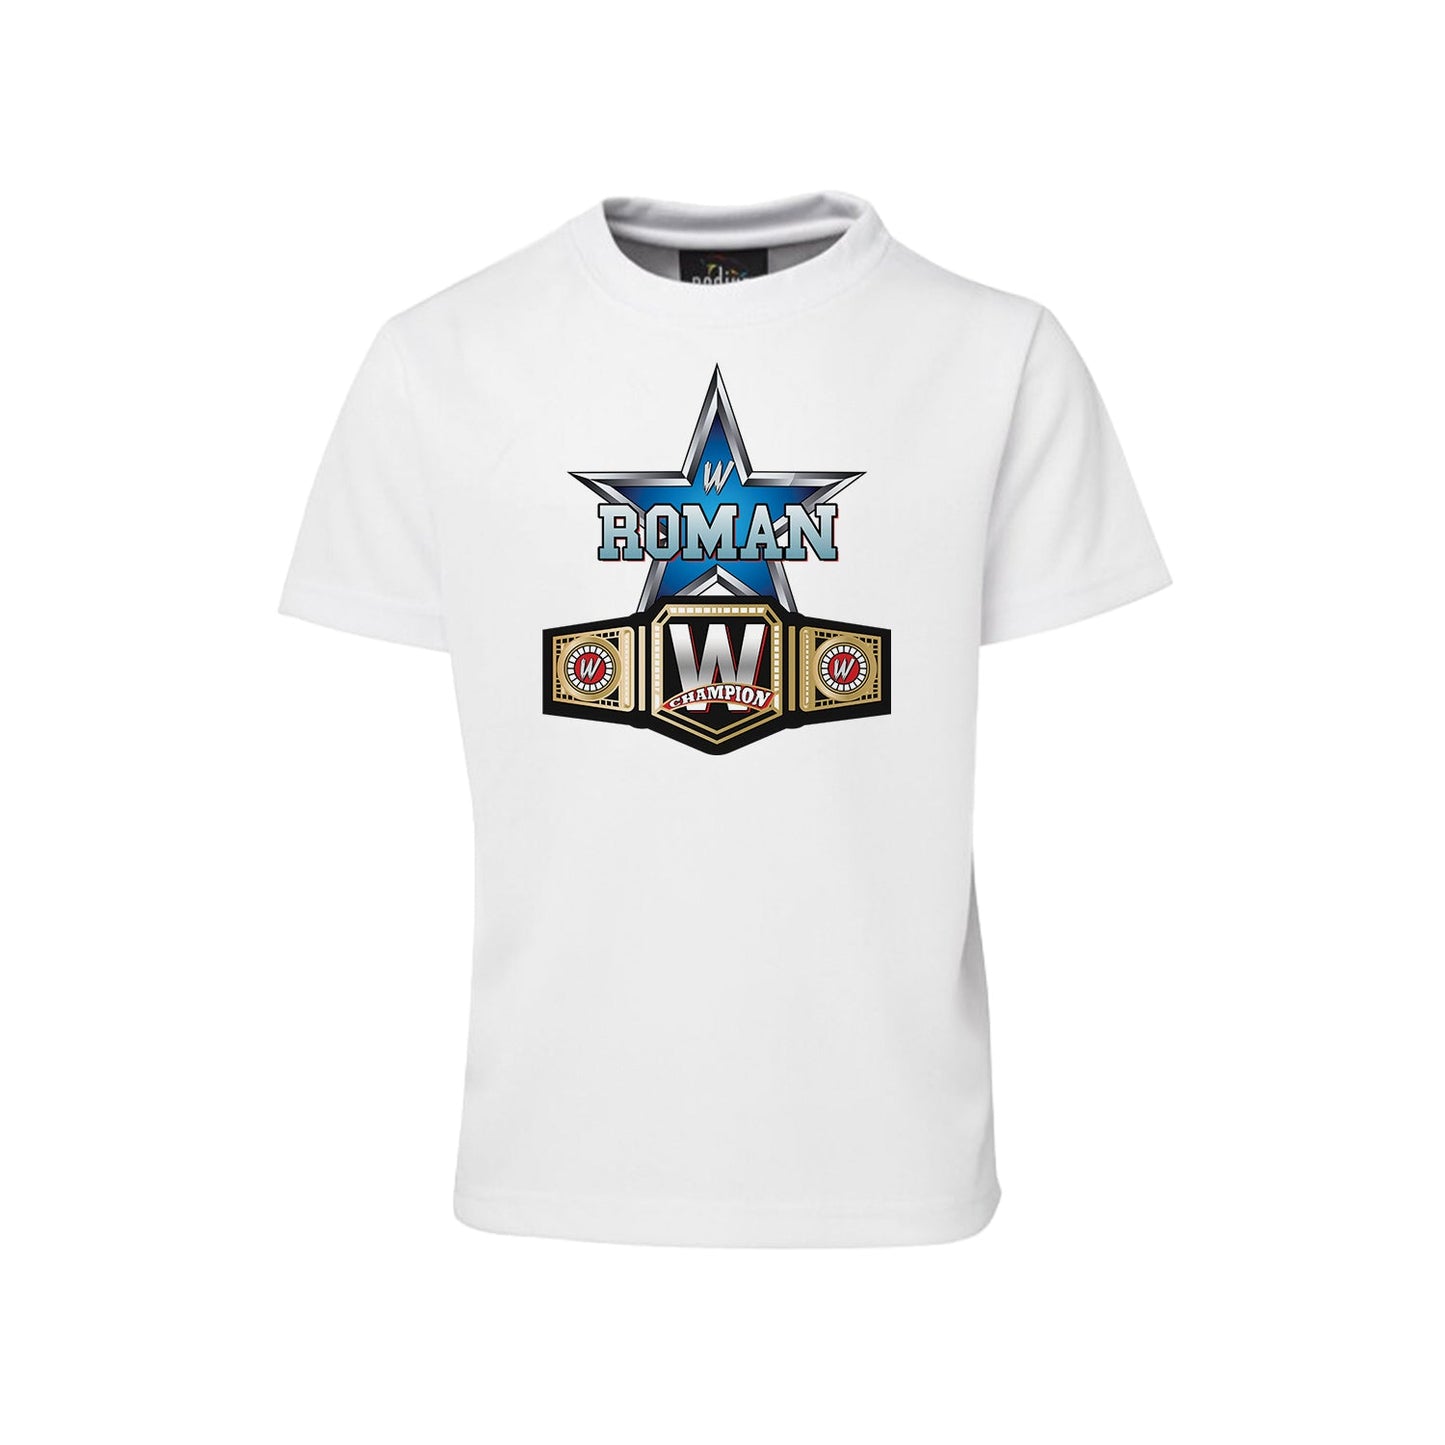 WWE sublimation T-shirt for wrestling enthusiasts